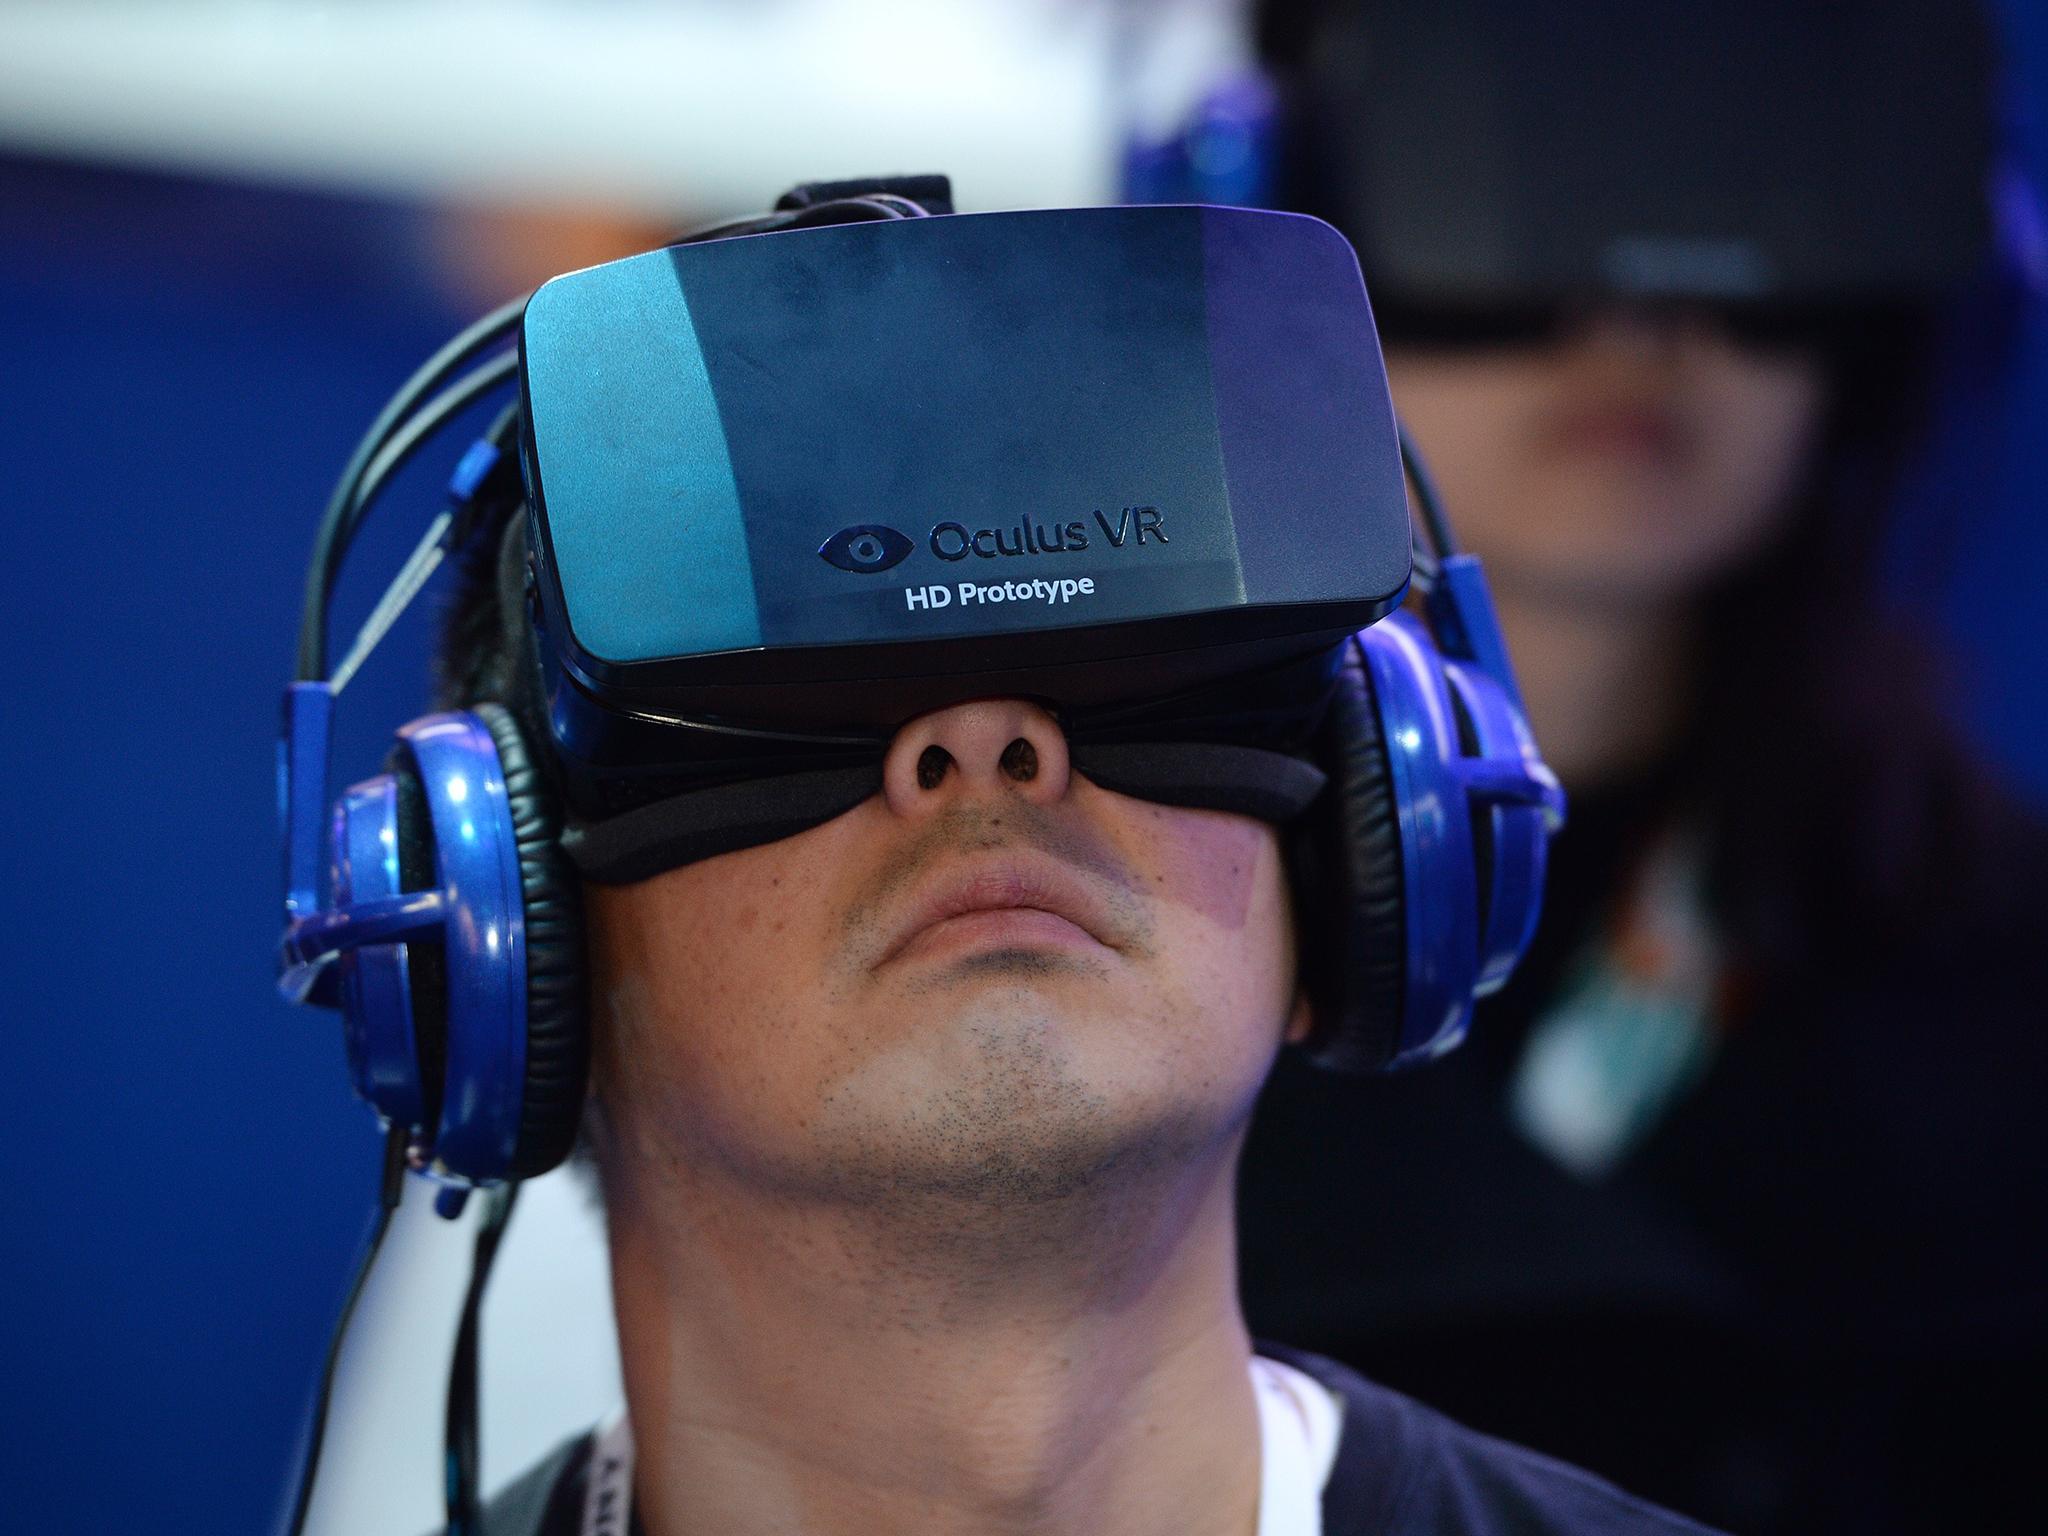 The OculusRift virtual reality headset, which has its screen built in